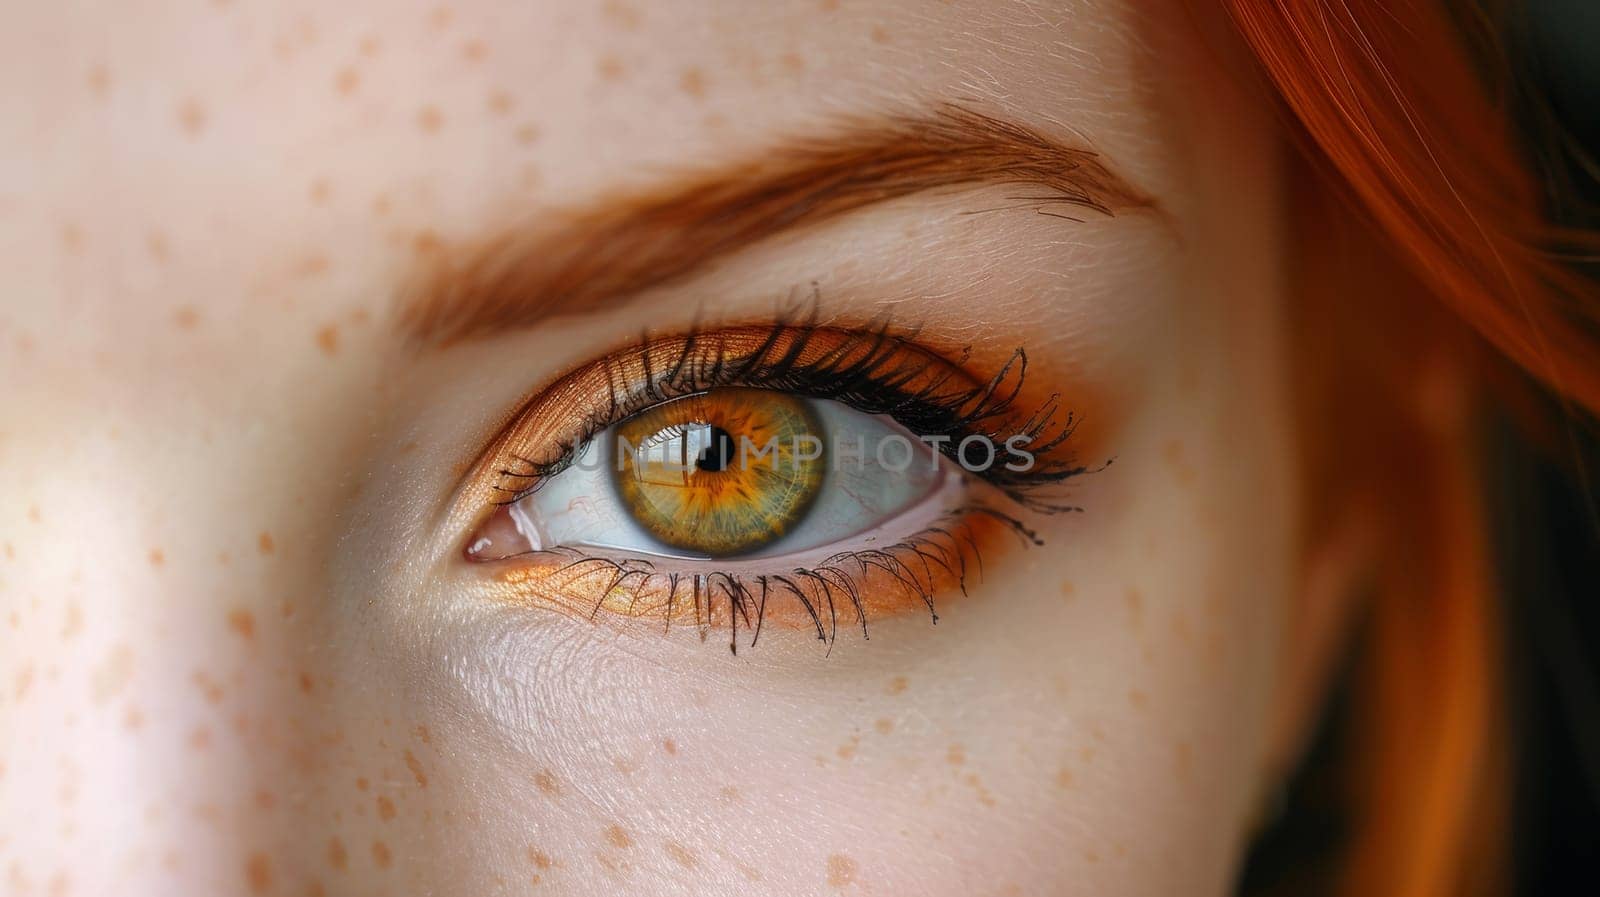 A close up of a woman's eye with red hair and freckles, AI by starush